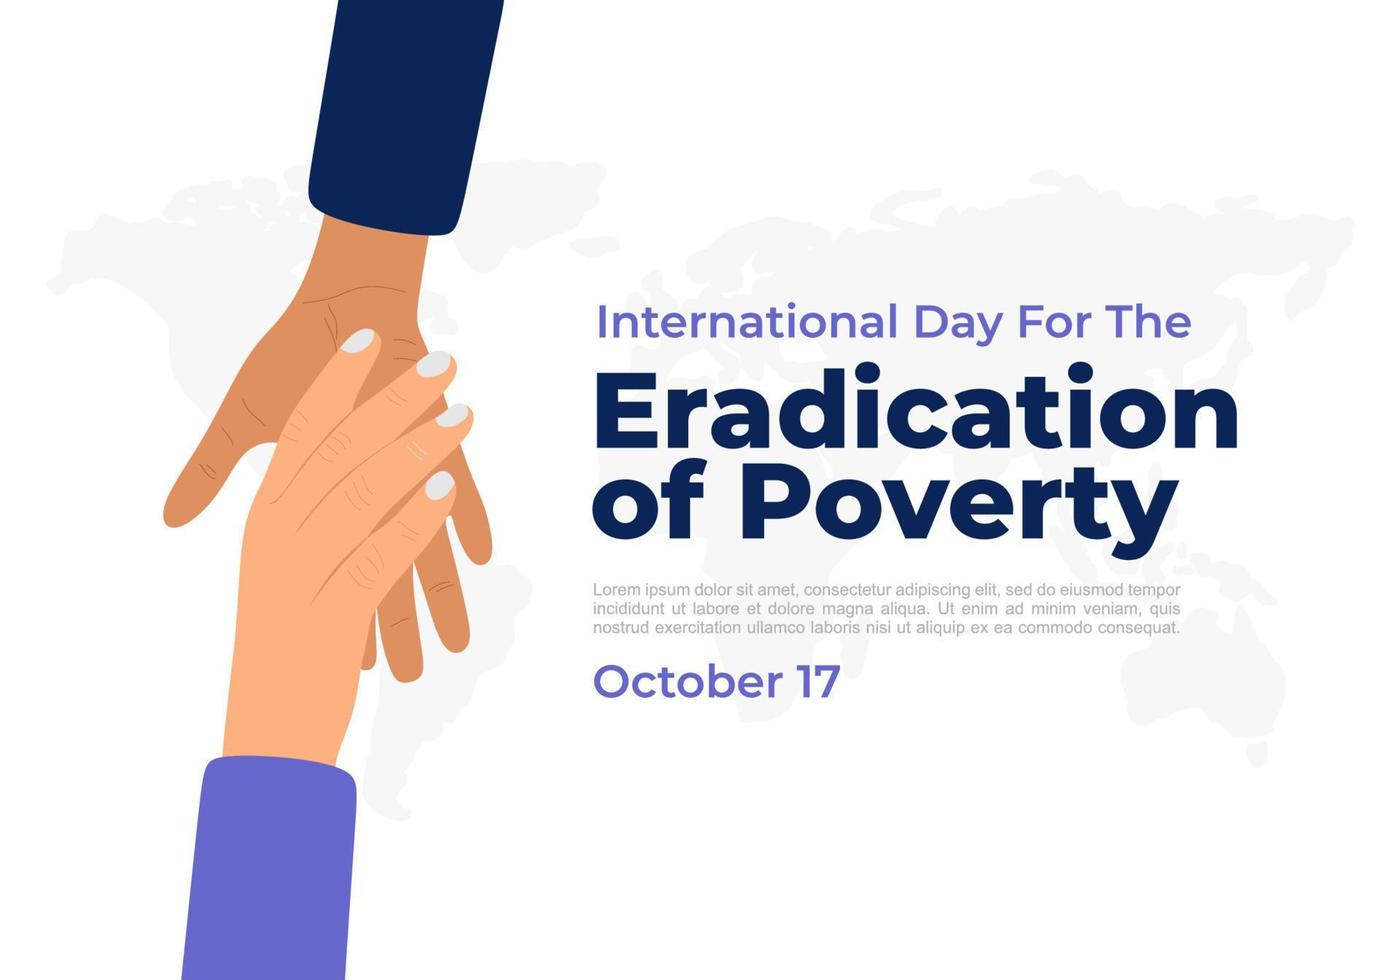 International day for the Eradication of Poverty poster on october 17. vector